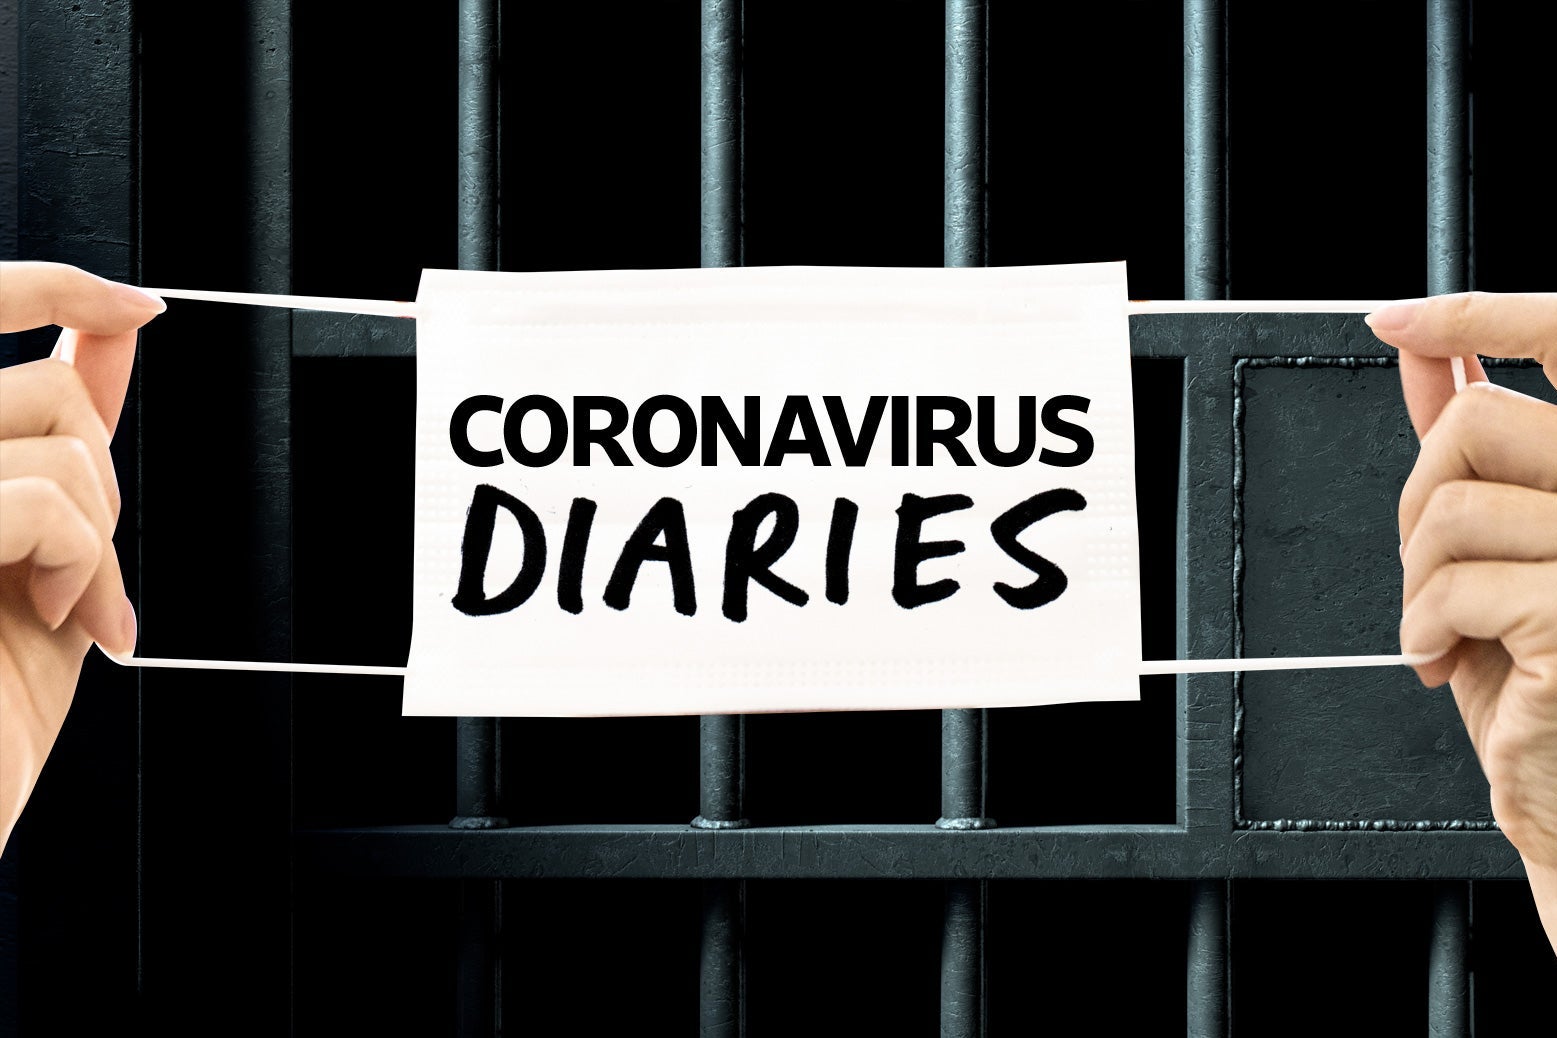 Coronavirus diaries written on a medical mask with a backdrop of prison cell bars